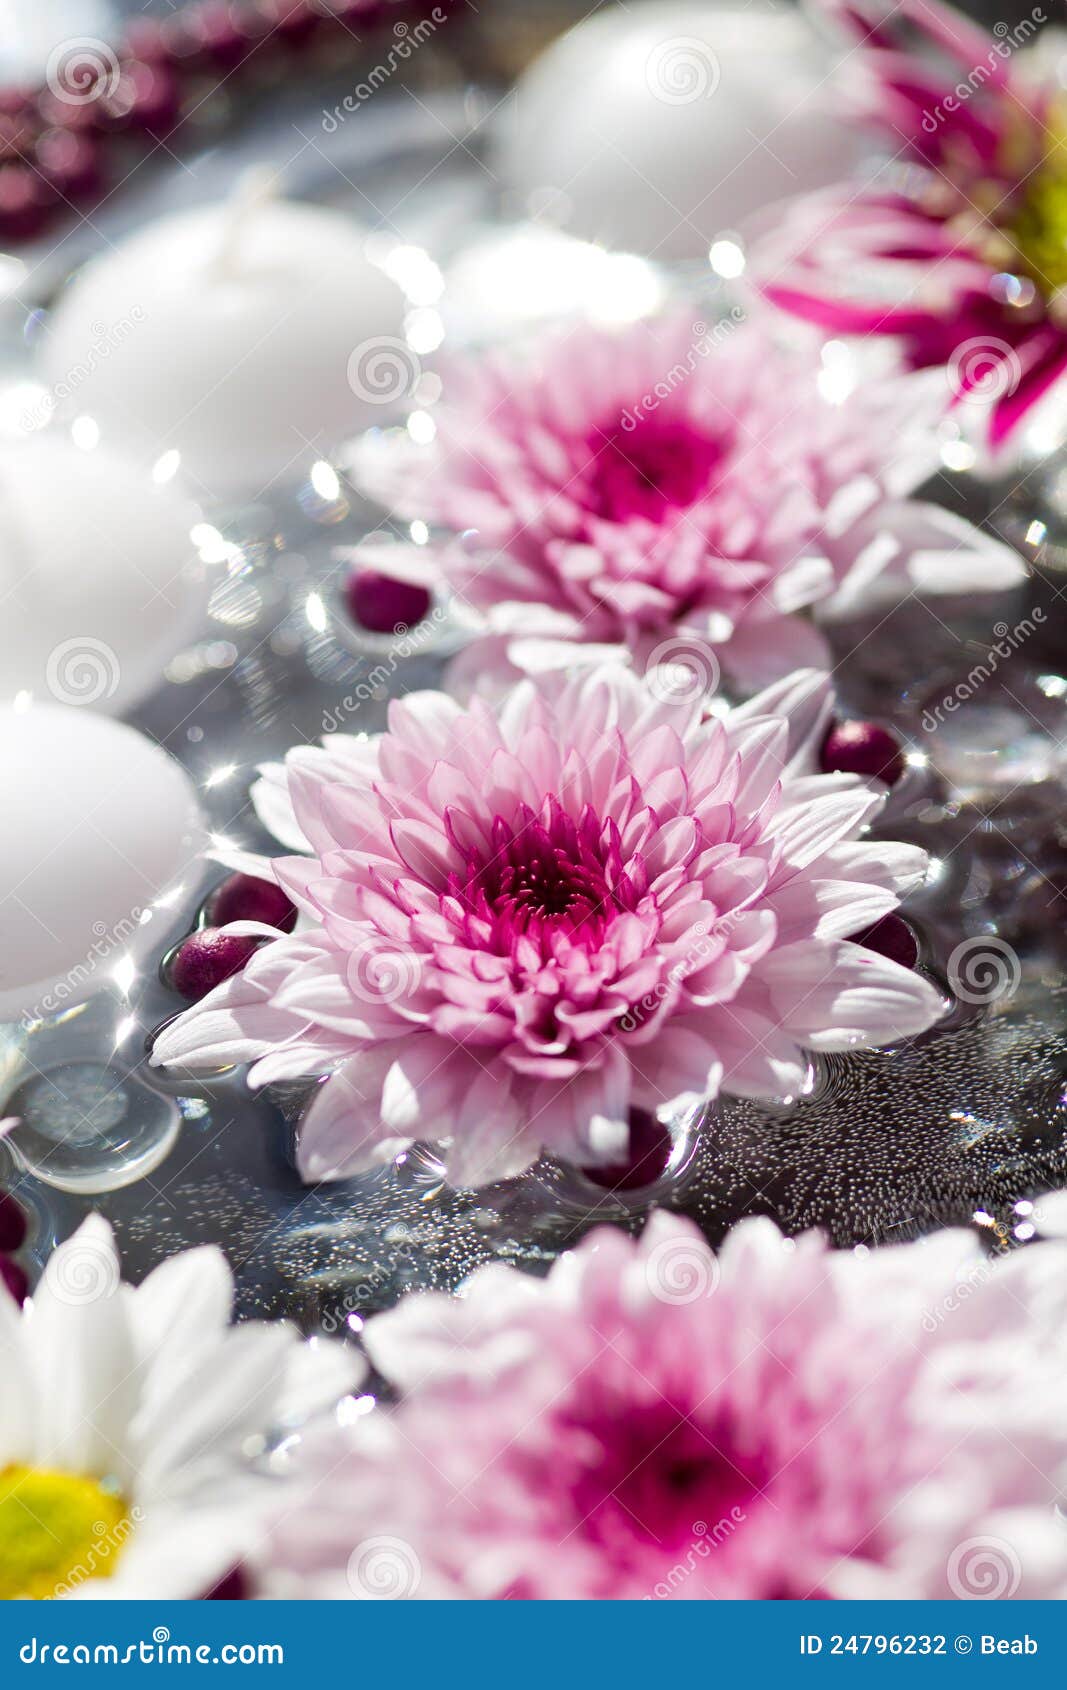 Macro Shot Of Flower Table Decorations Stock Photography - Image ...